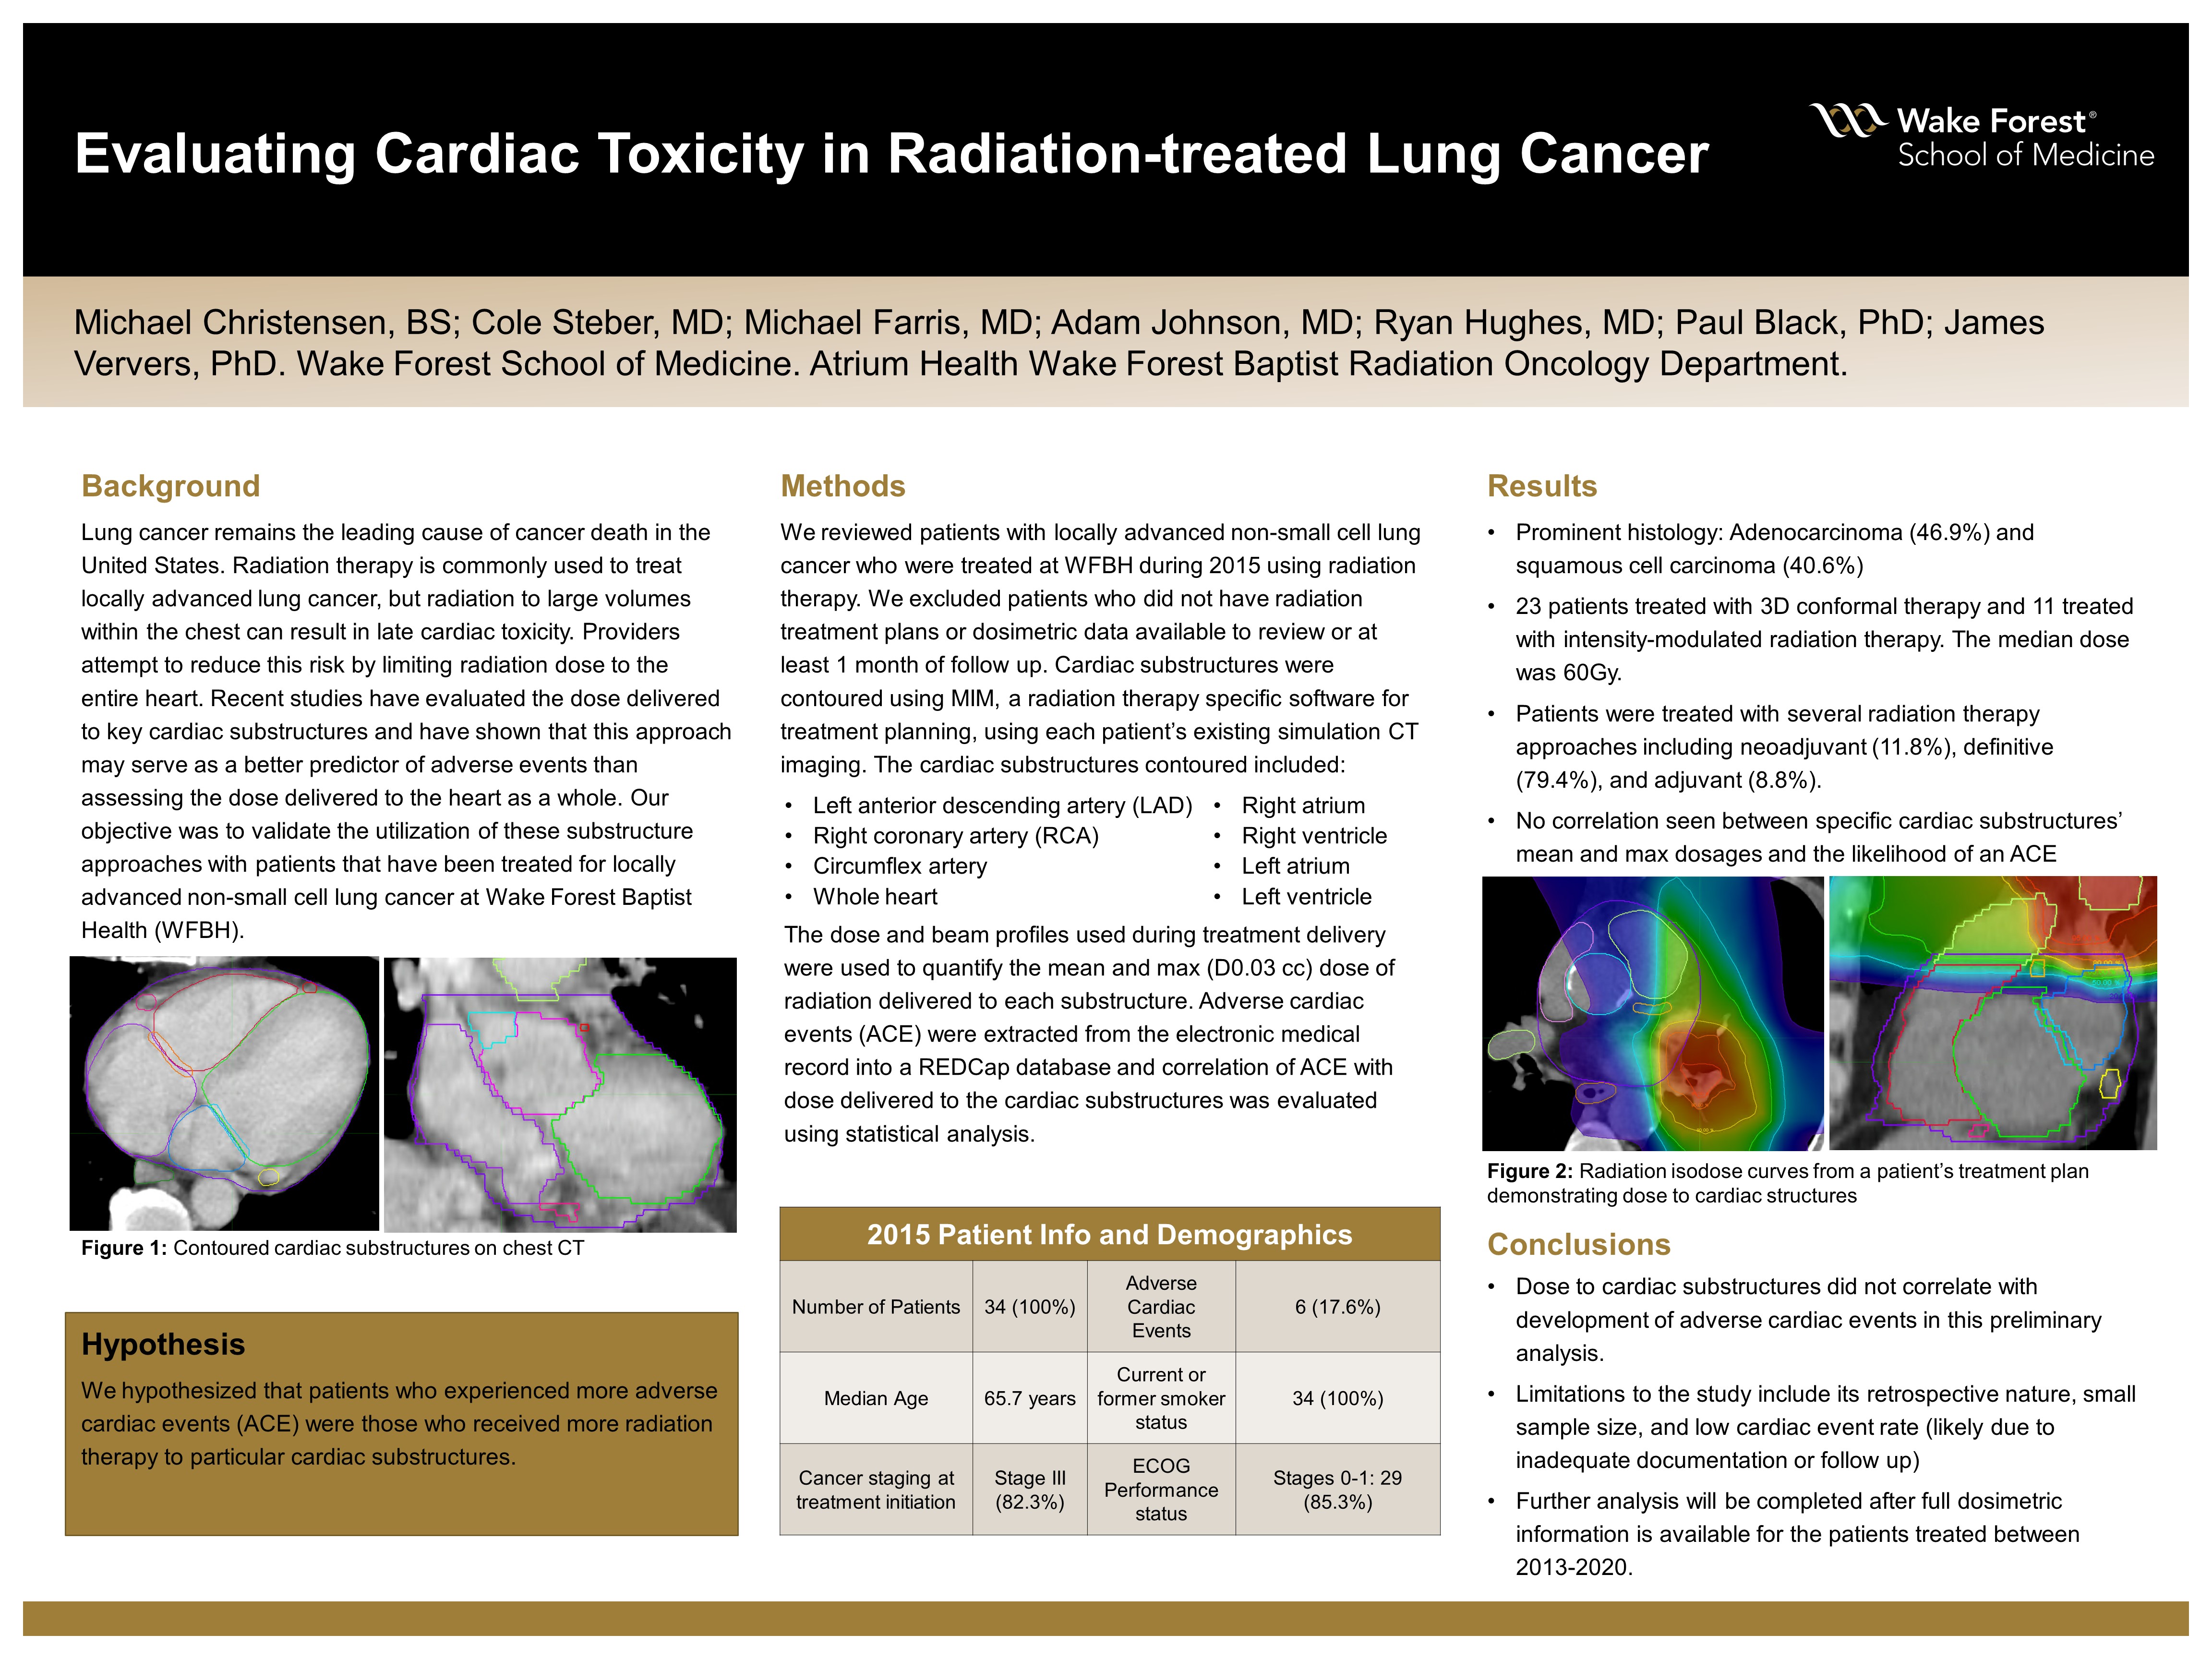 Showcase Image for Evaluating Cardiac Toxicity in Locally Advanced Lung Cancer Treated with Chemo Radiation